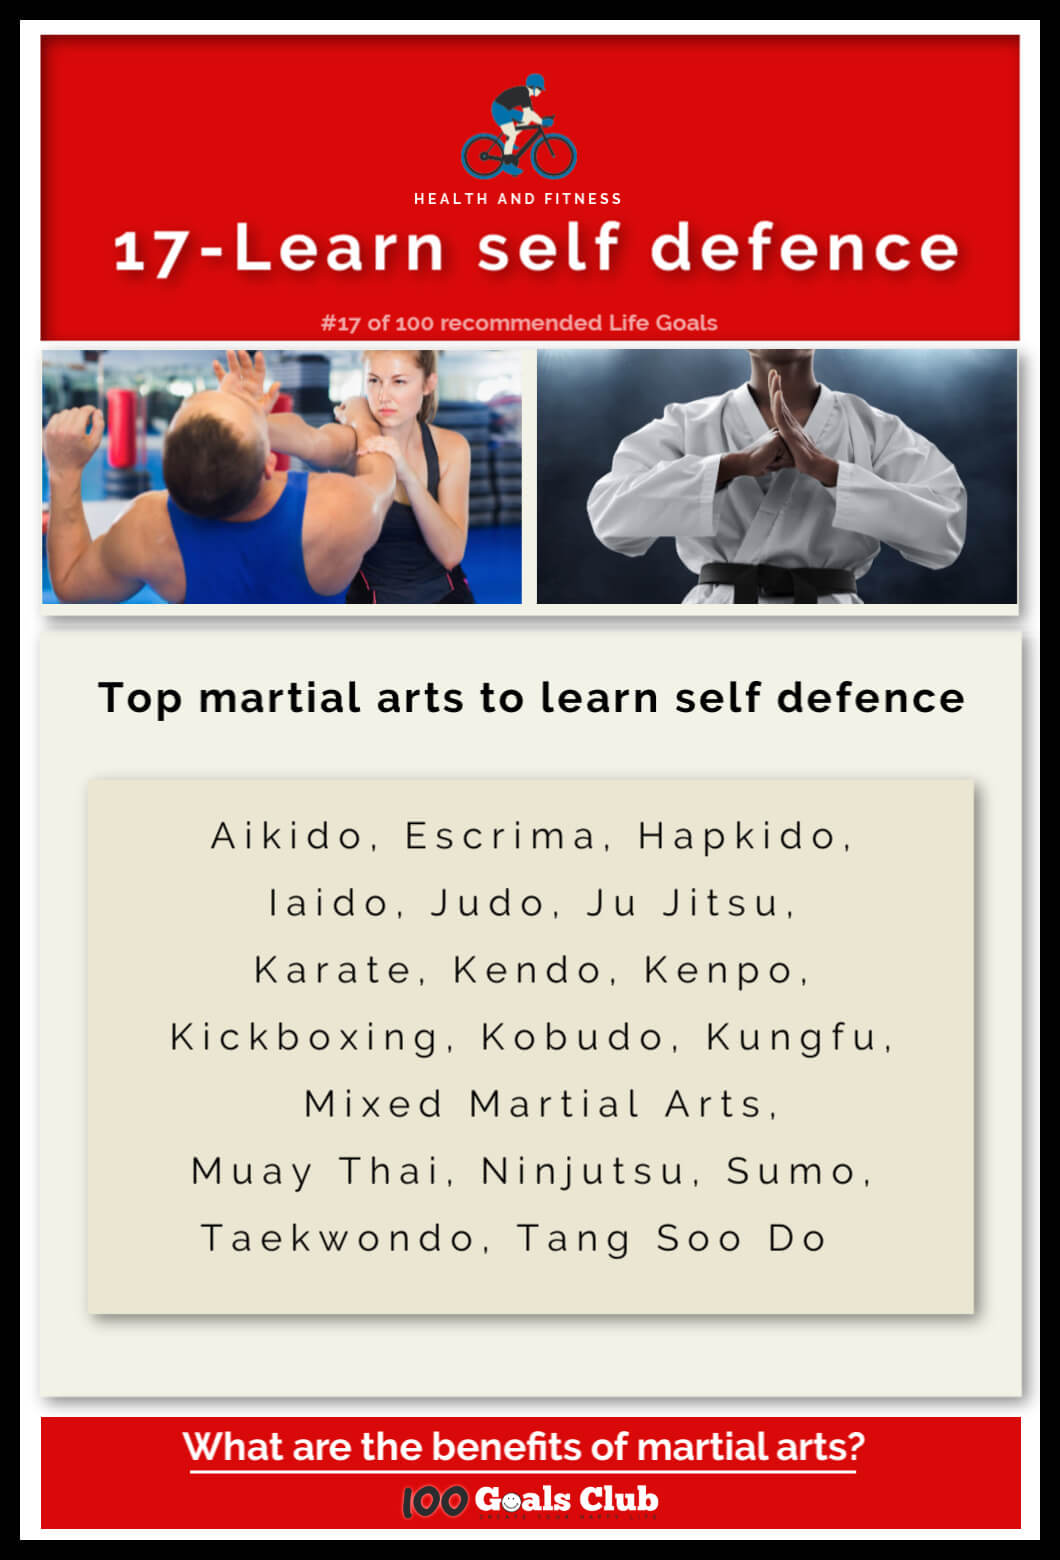 Benefits of Self-Defence & Why Consider Taking Classes